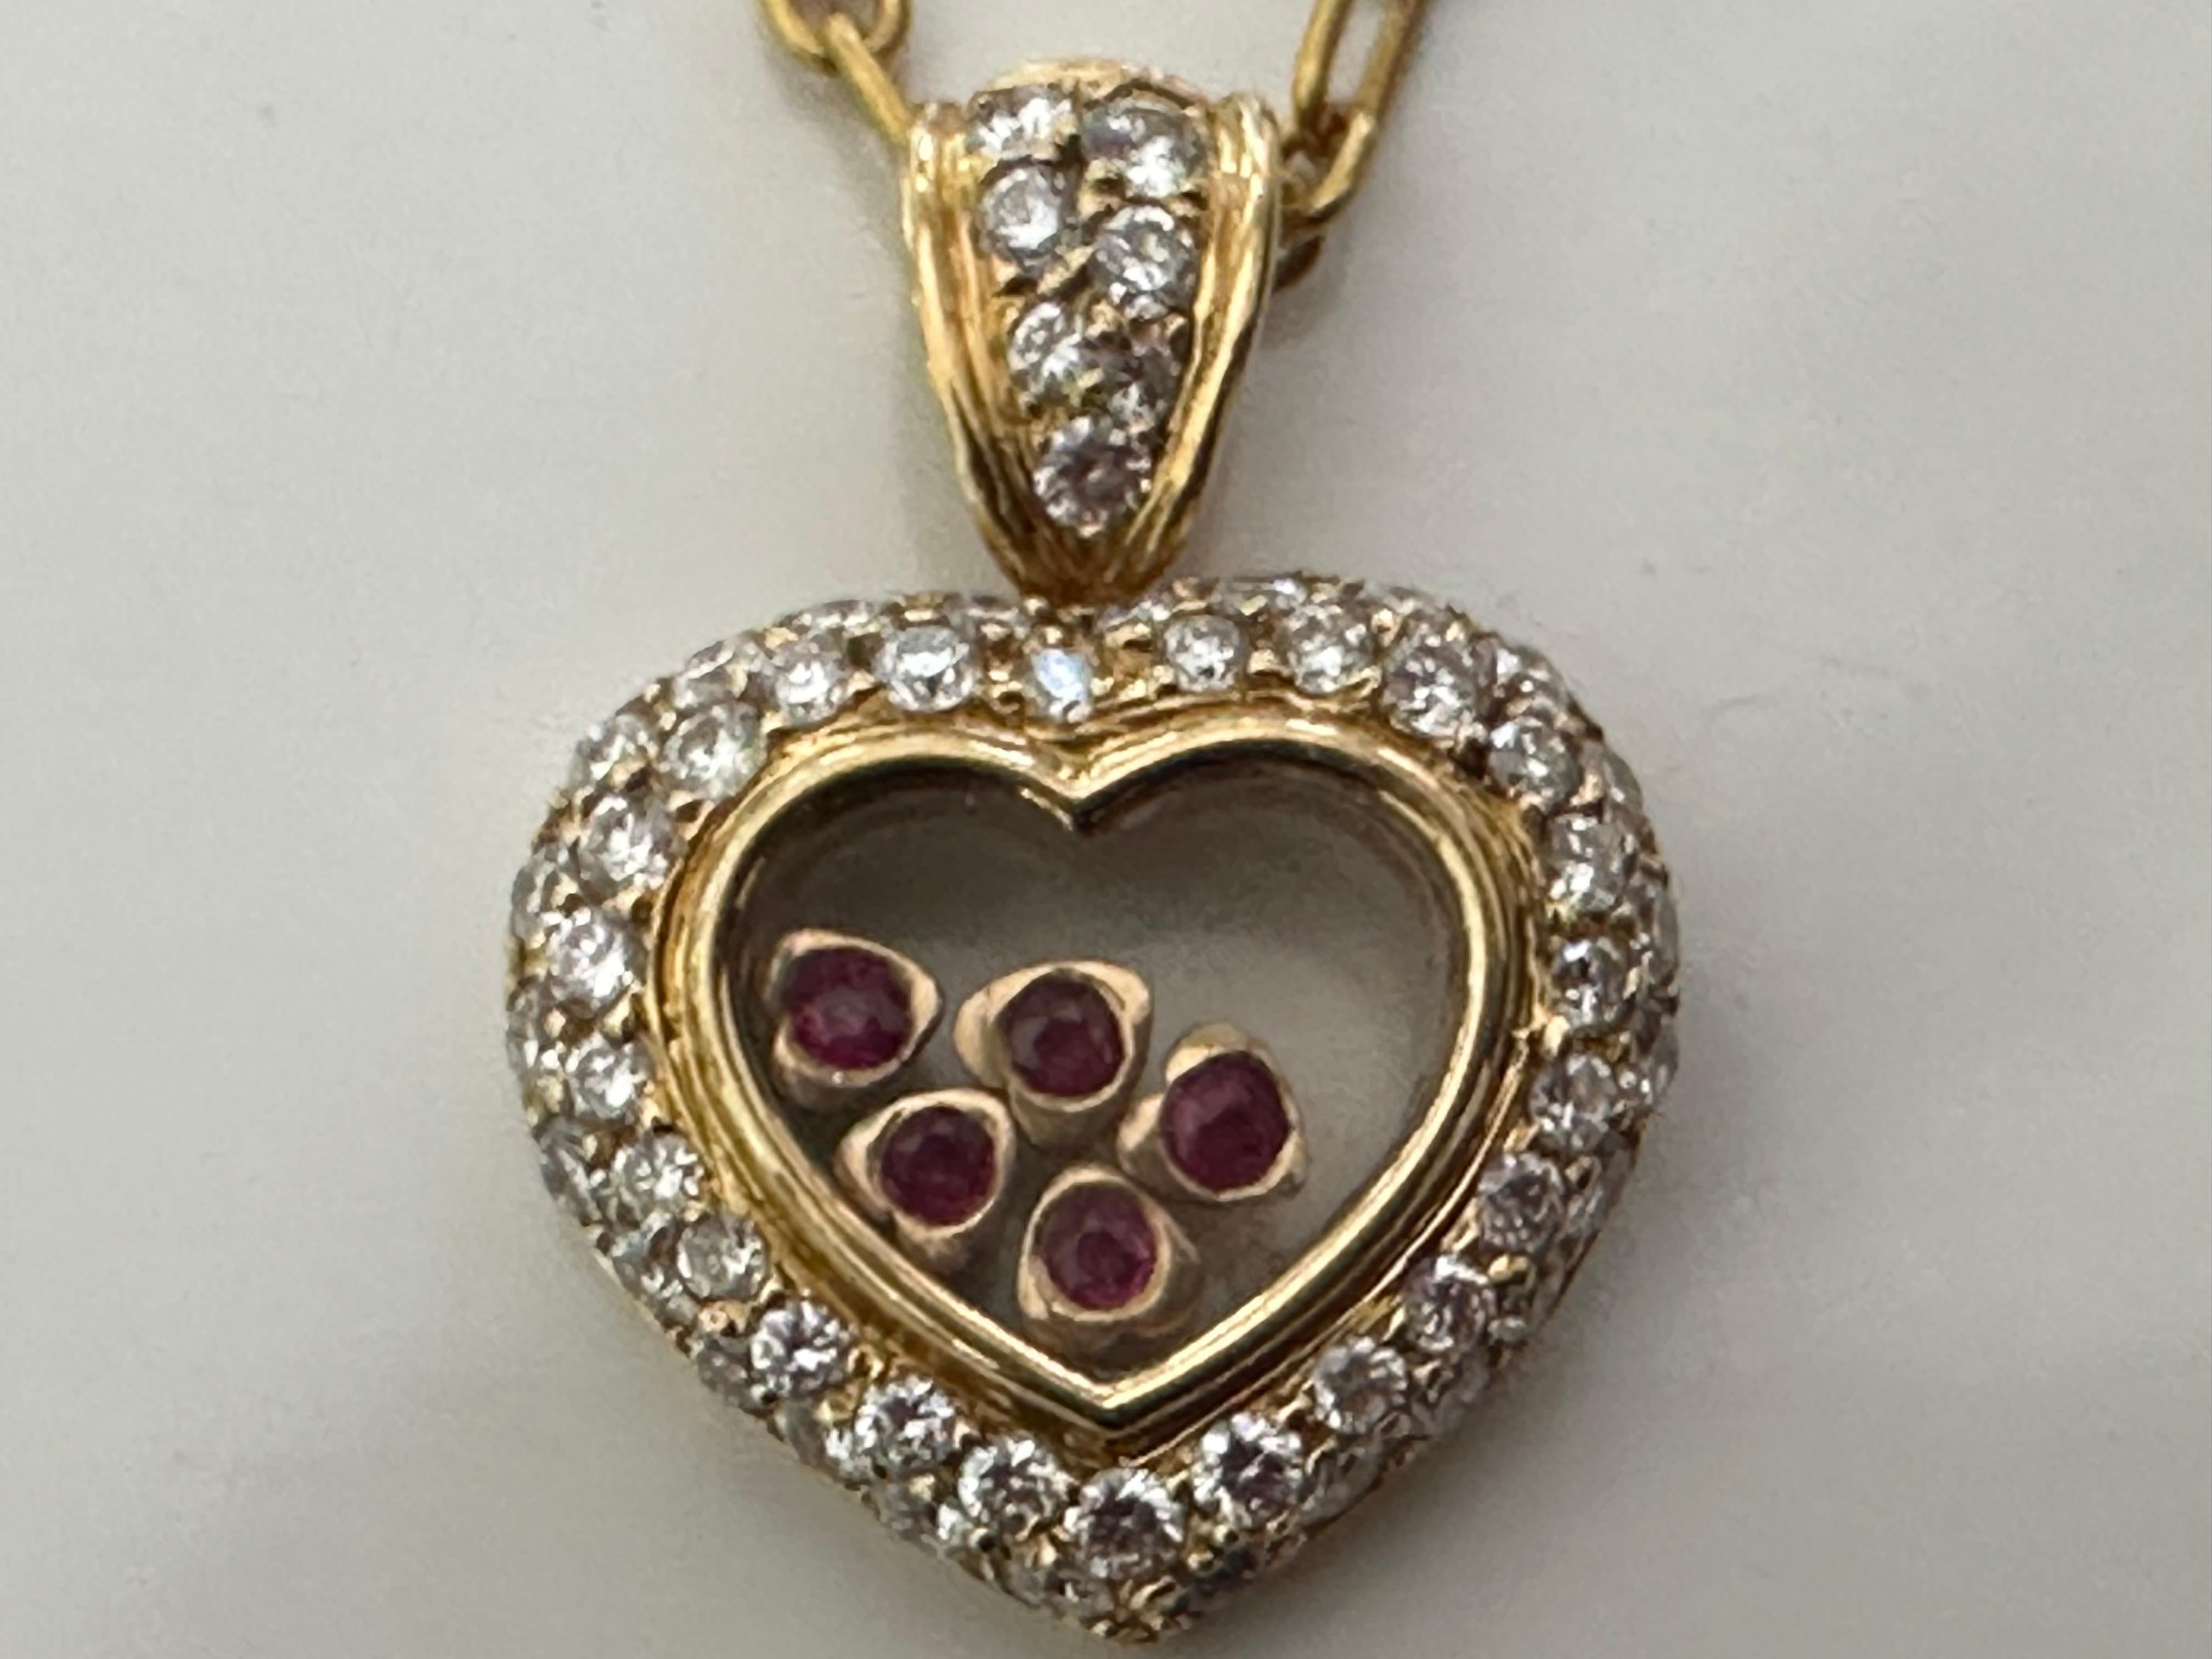 This heart-shaped pendant crafted in 18K yellow gold features approximately 1.30 carats of glistening round brilliant-cut diamonds, F color, VS clarity and five red rubies floating inside the heart (inspired by Chopard's Happy Hearts collection).